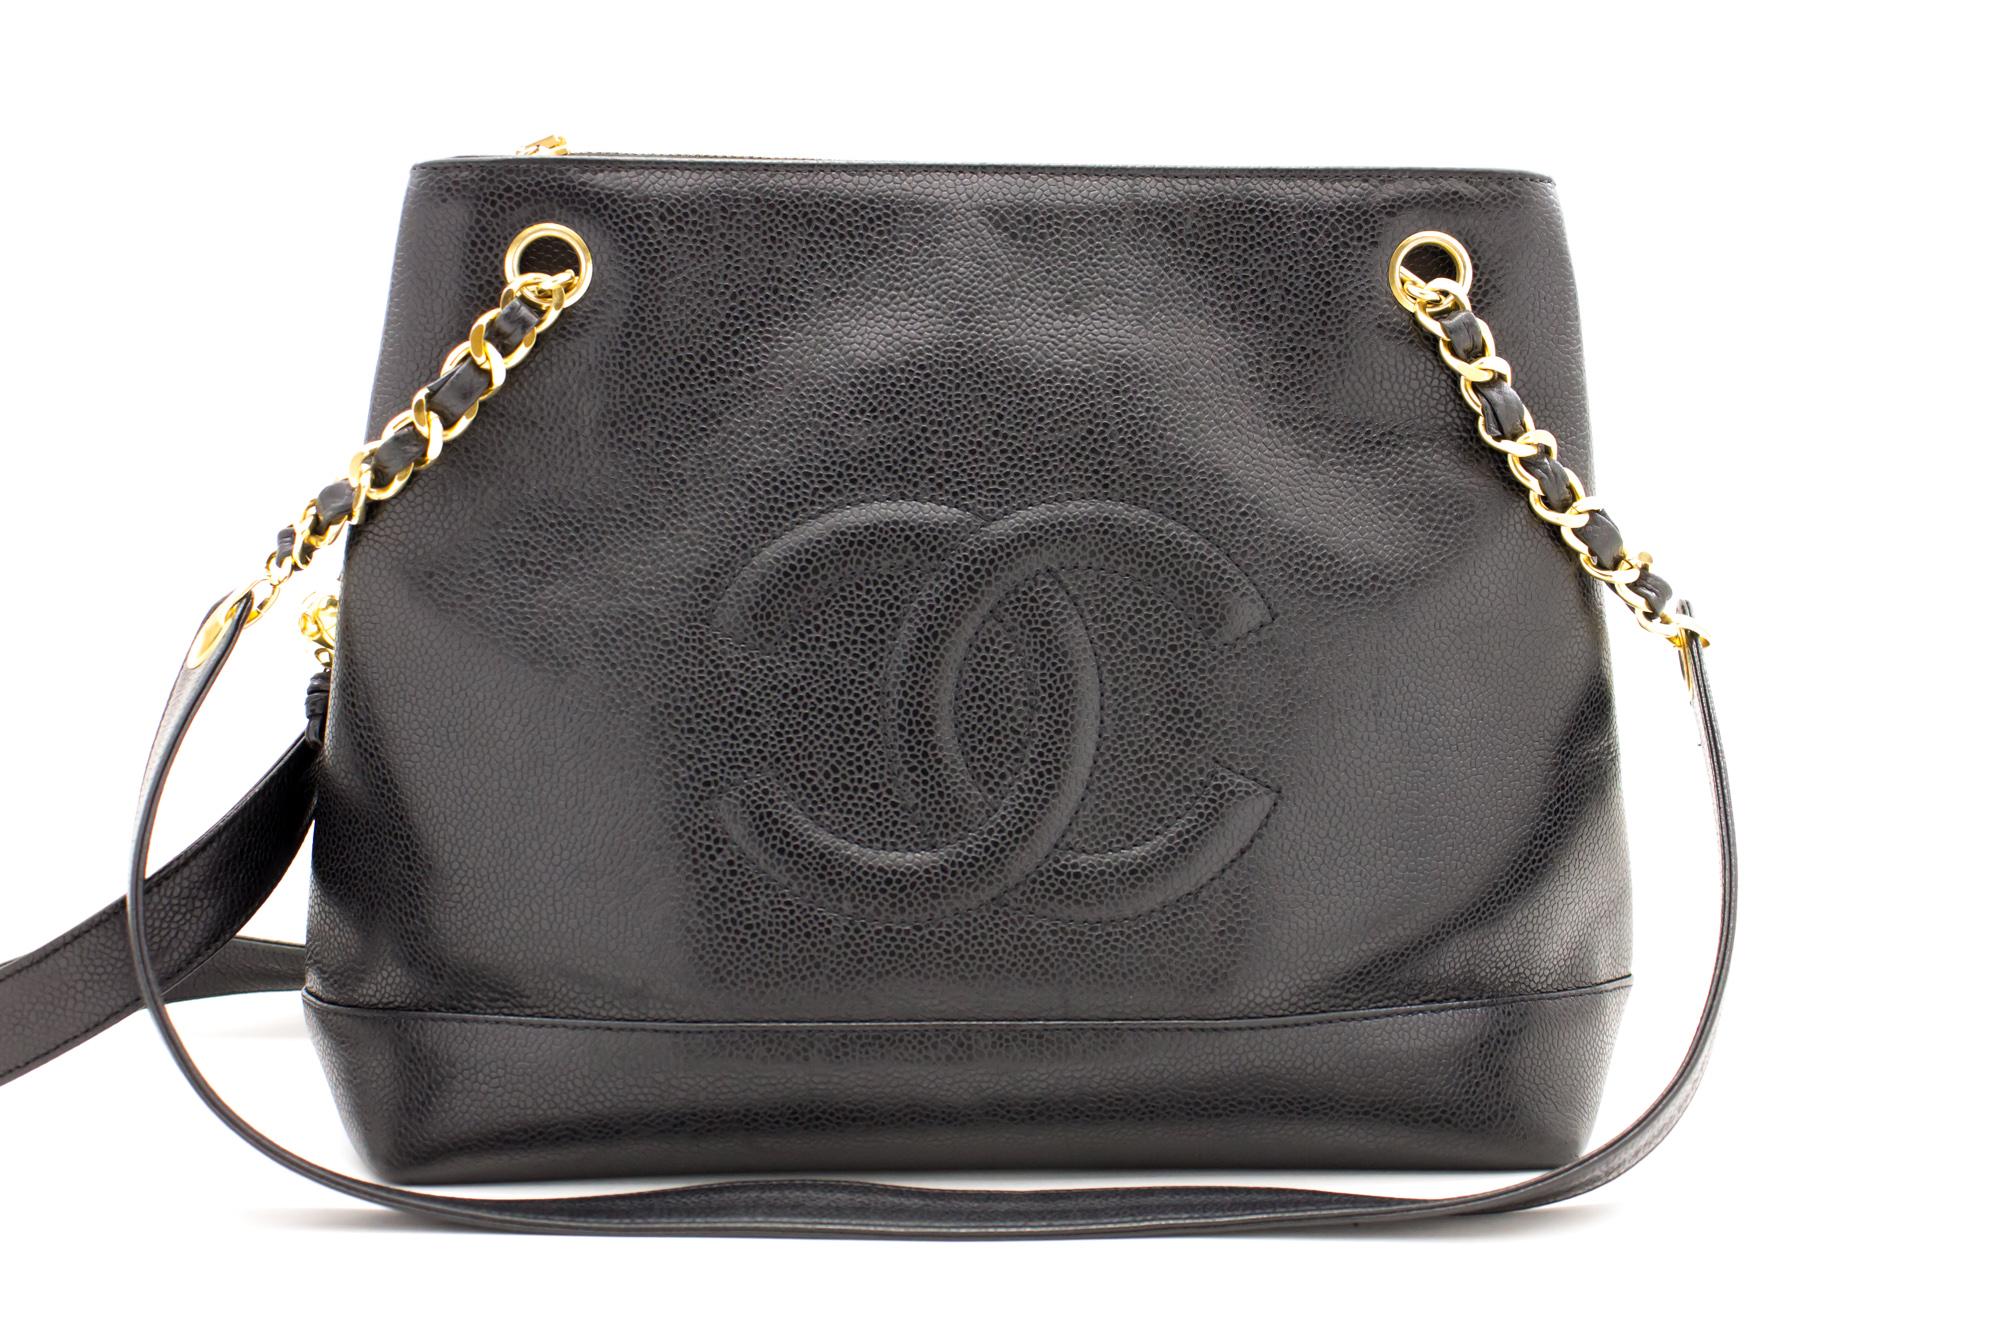 An authentic CHANEL Caviar Large Chain Shoulder Bag Black Leather Gold Zipper. The color is Black. The outside material is Leather. The pattern is Solid. This item is Vintage / Classic. The year of manufacture would be 1991-1994.
Conditions &